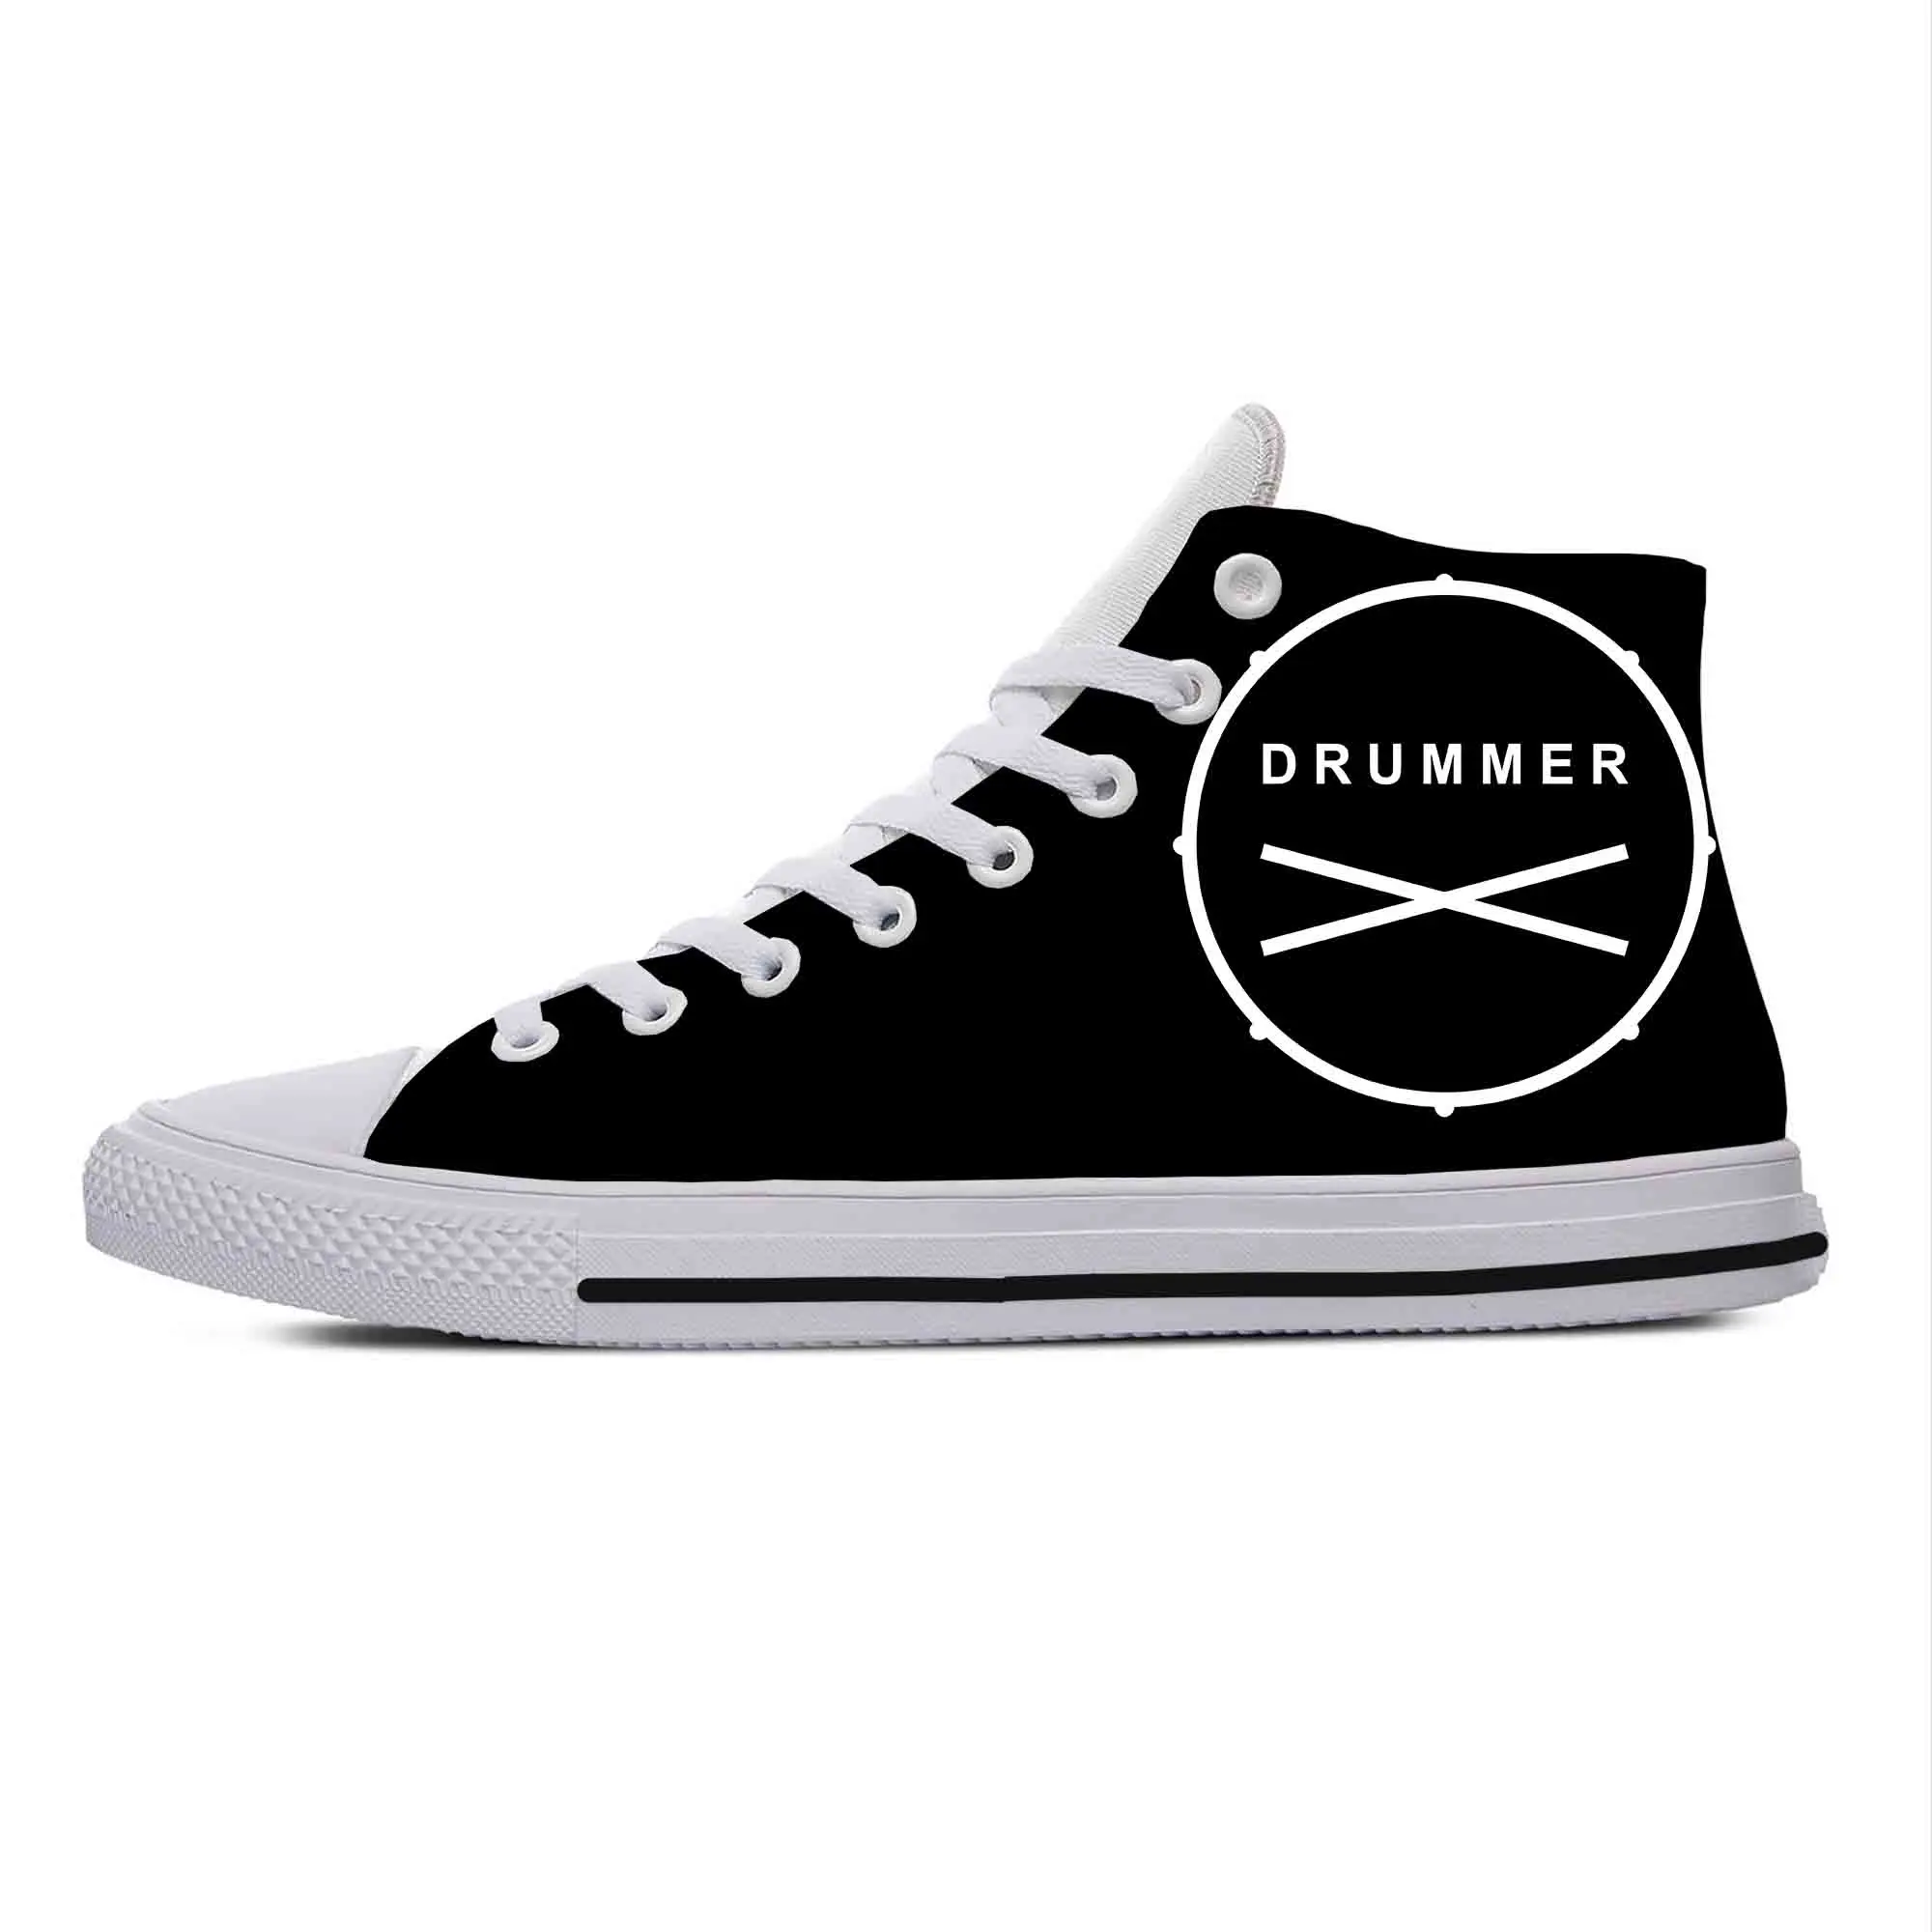 

Drummer Drum Sticks Drumsticks Drumming Rock Roll Casual Cloth Shoes High Top Comfortable Breathable 3D Print Men Women Sneakers